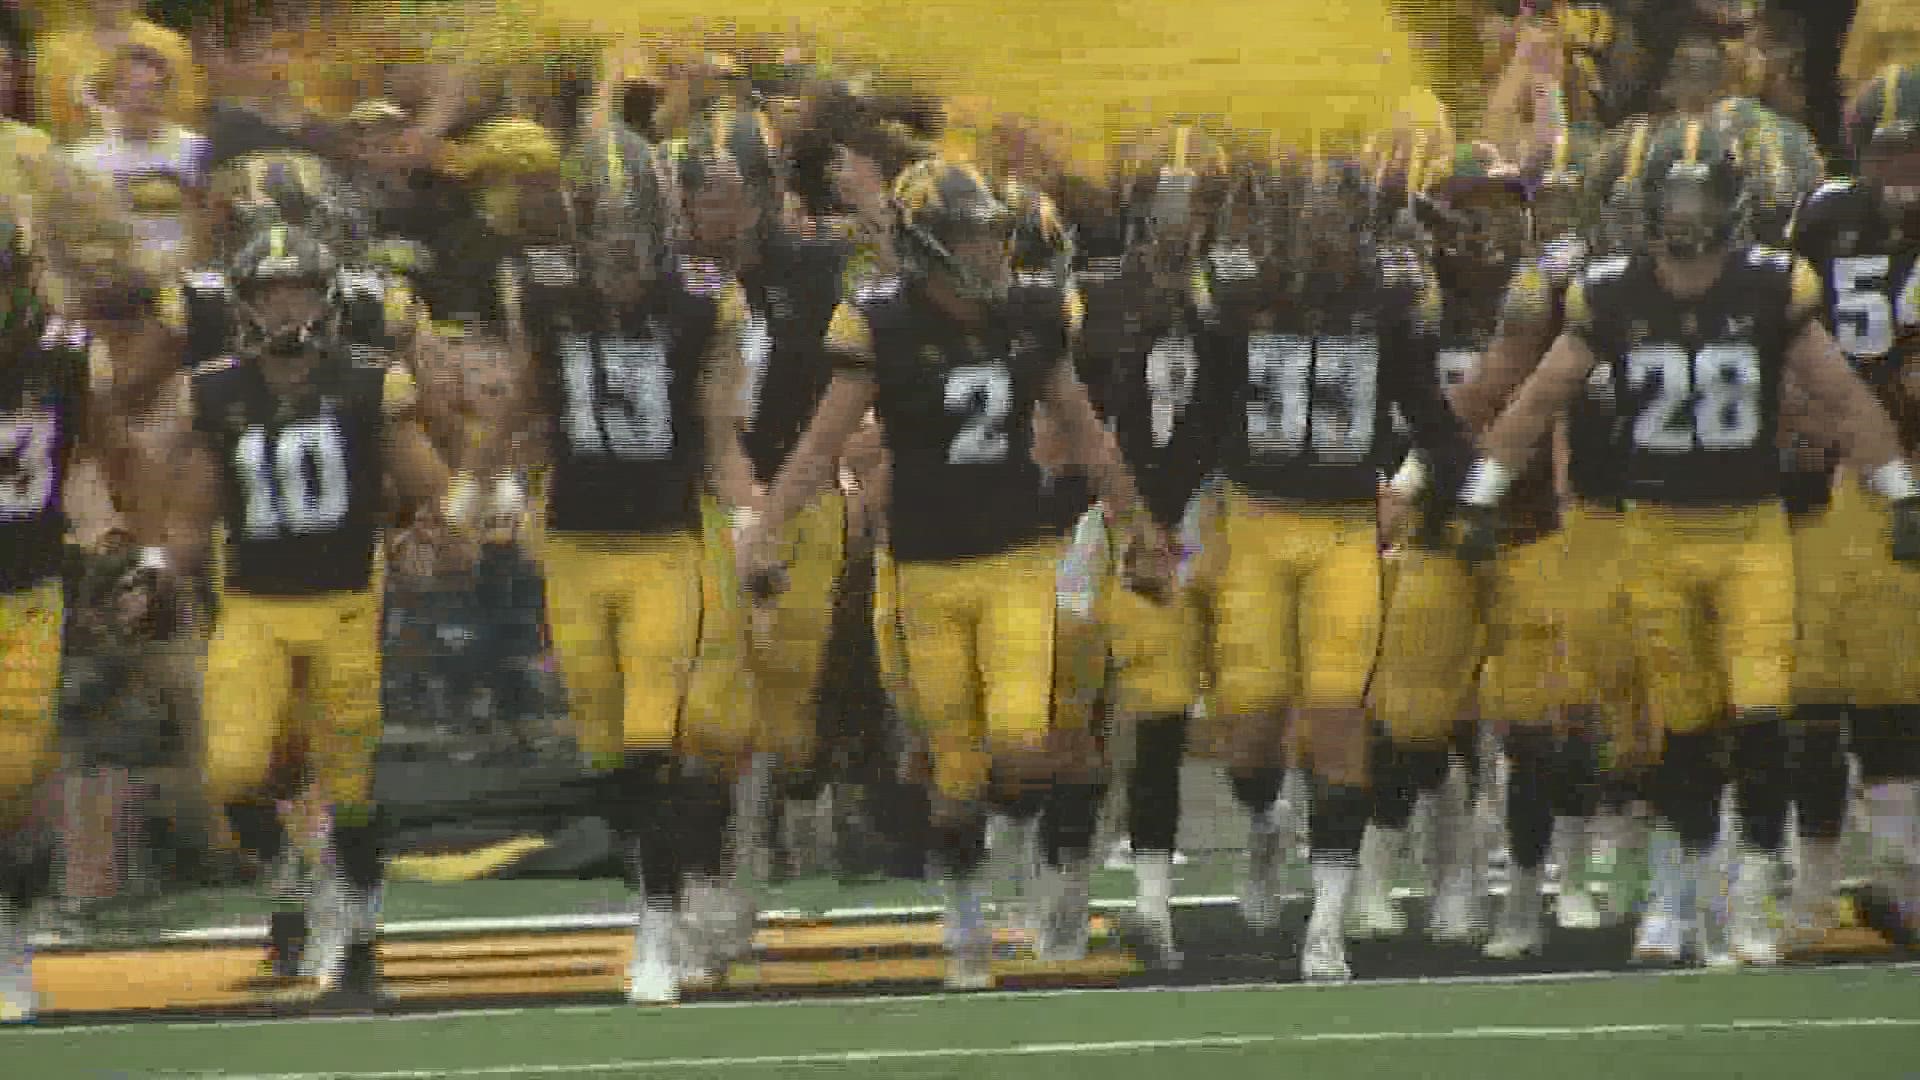 Iowa's matchup against Penn State will be the biggest game at Kinnick Stadium since 1985.